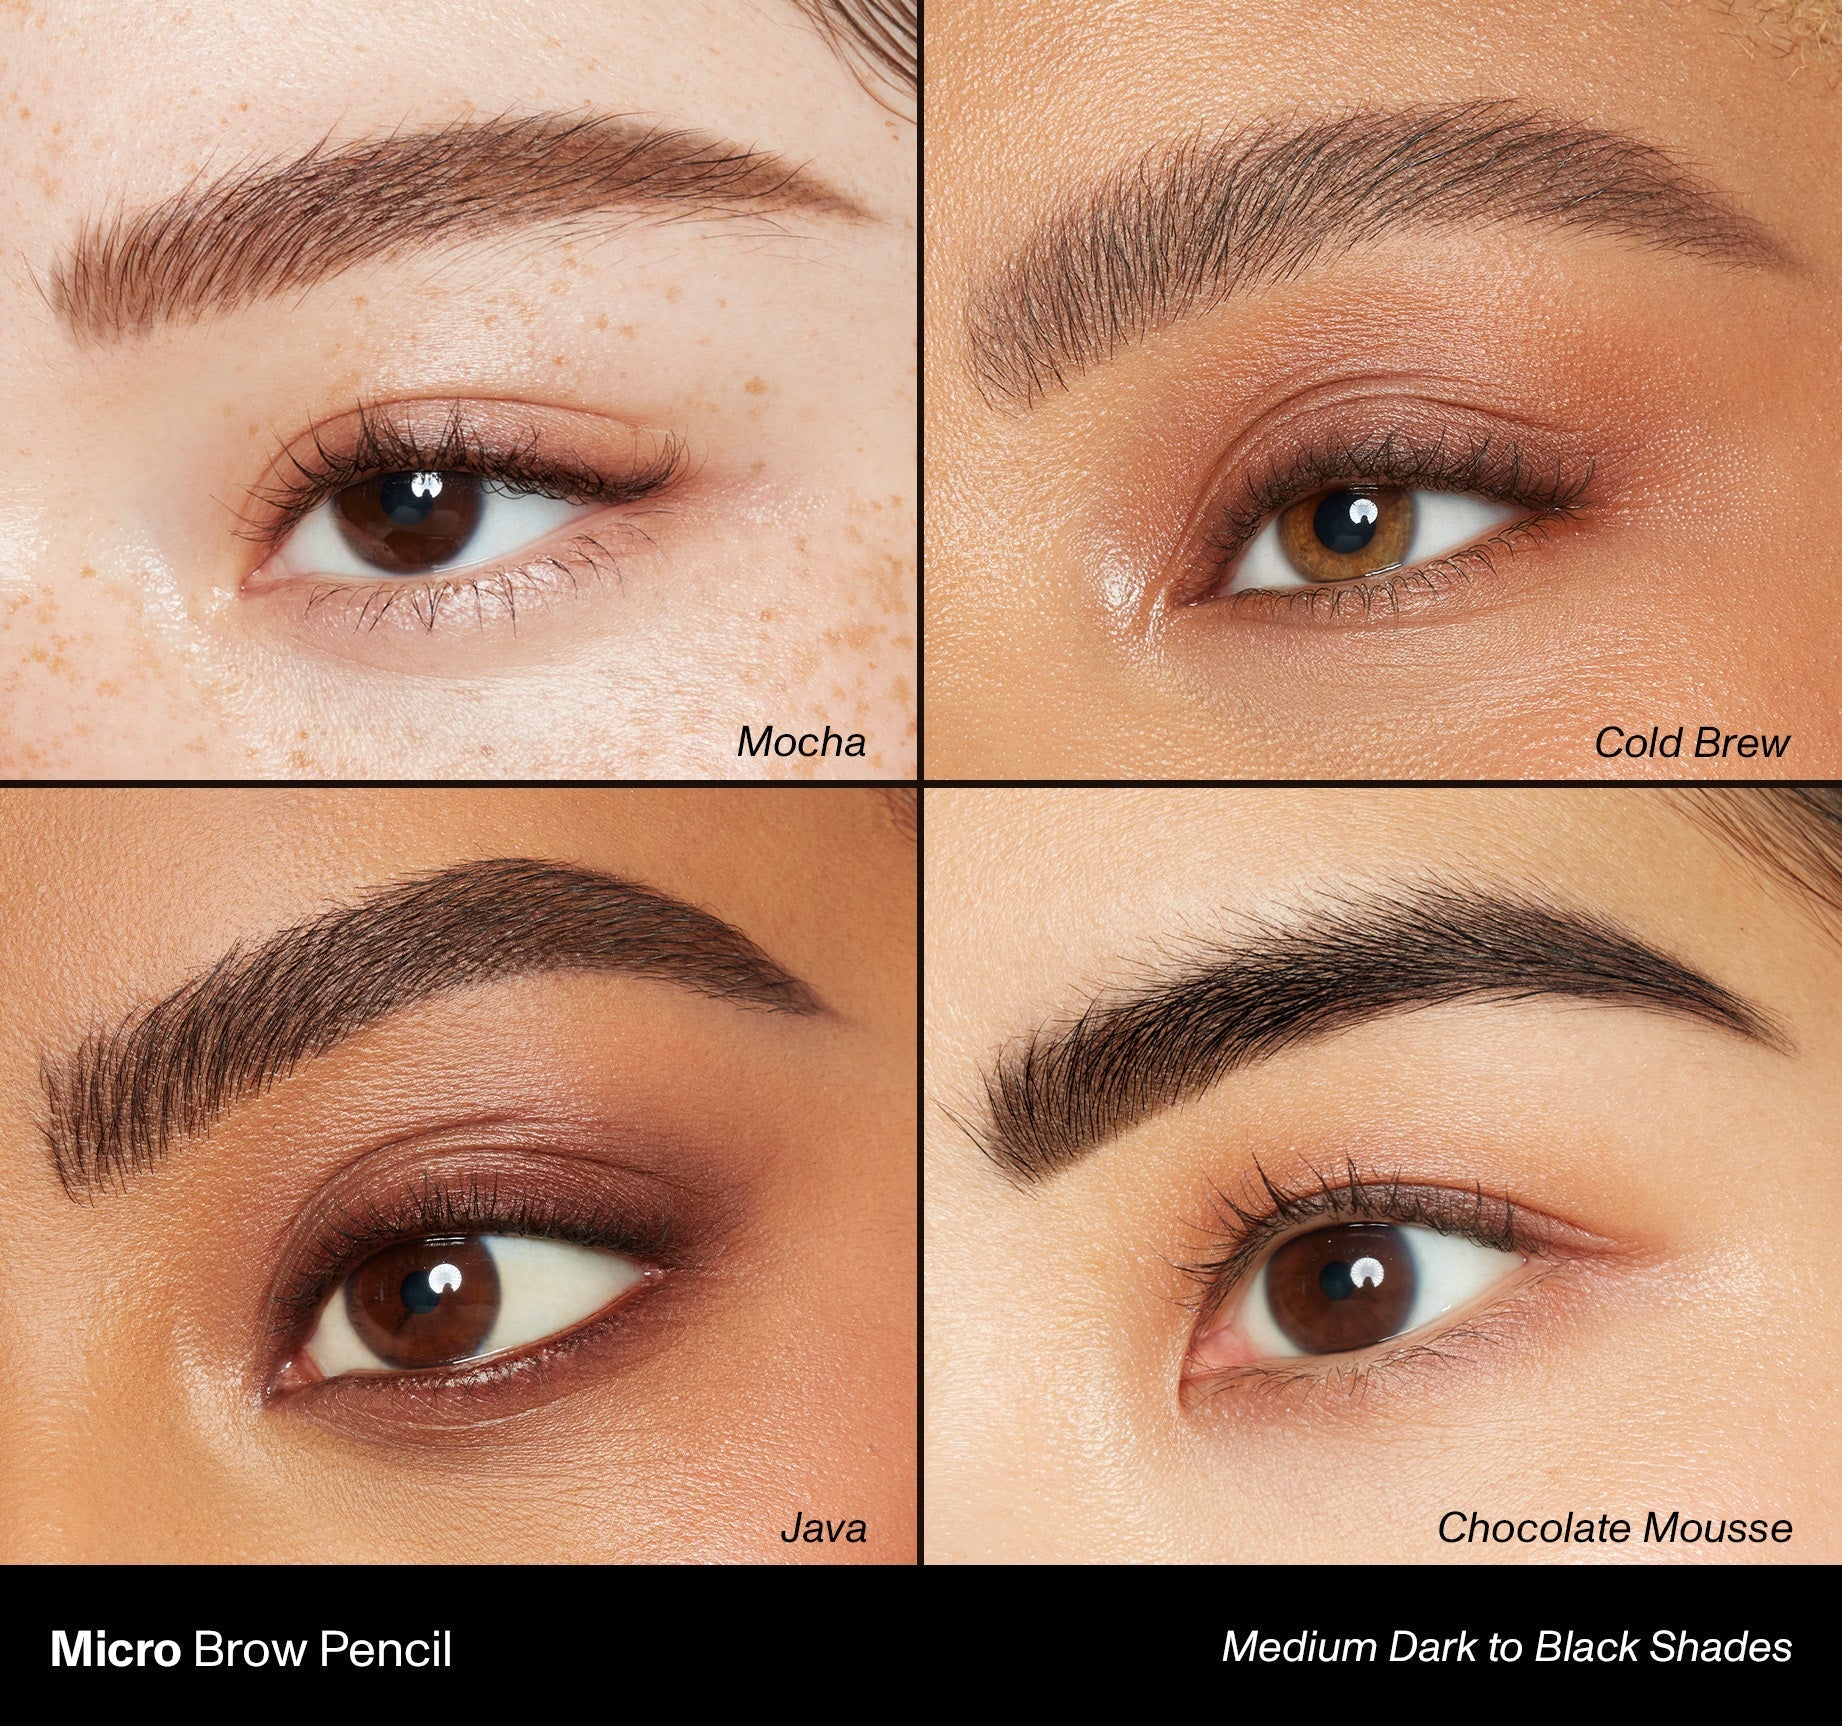 Micro Brow Dual-Ended Pencil & Spoolie - Cold Brew - Image 3